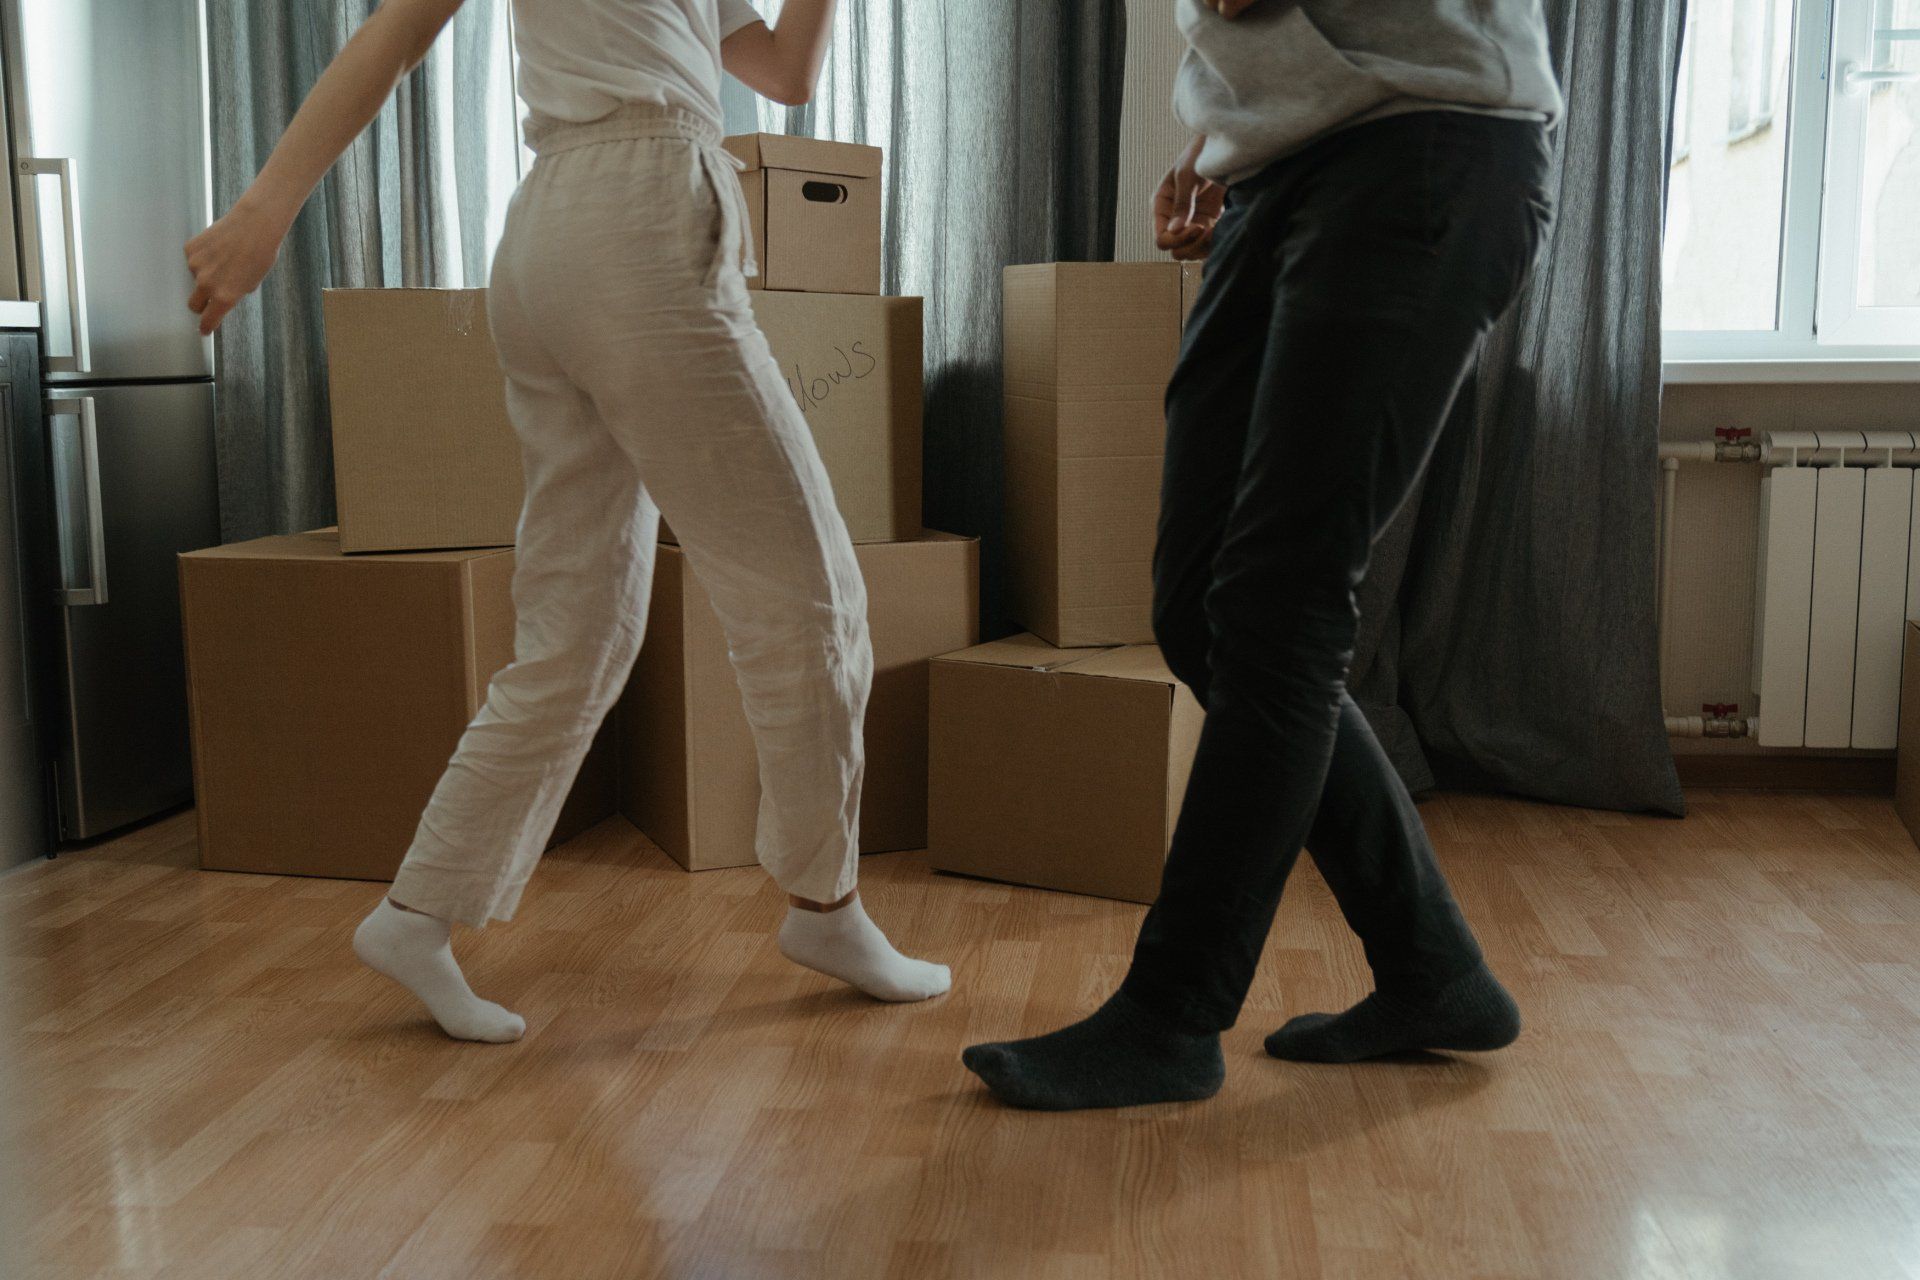 two persons walking on the floor with boxes in the background